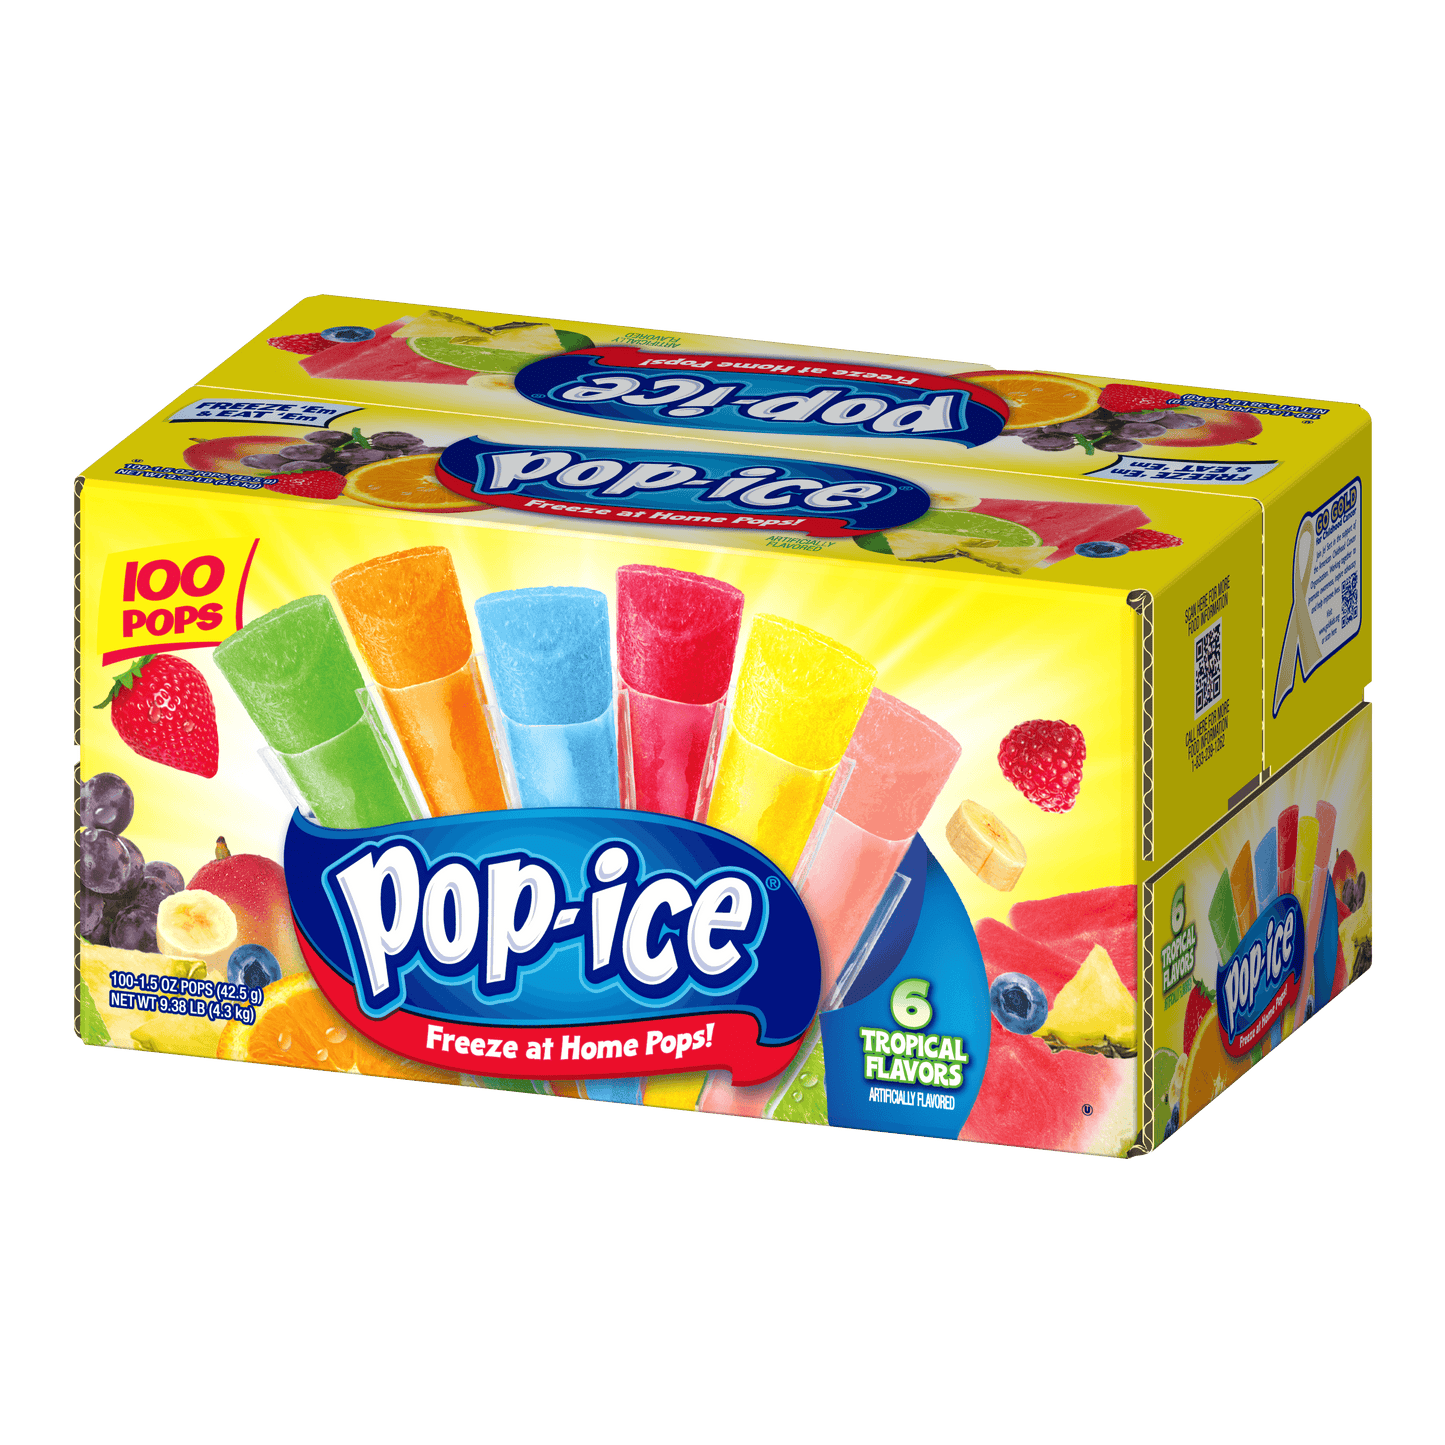 Pop-Ice Tropical 100 count freezer pops packaging